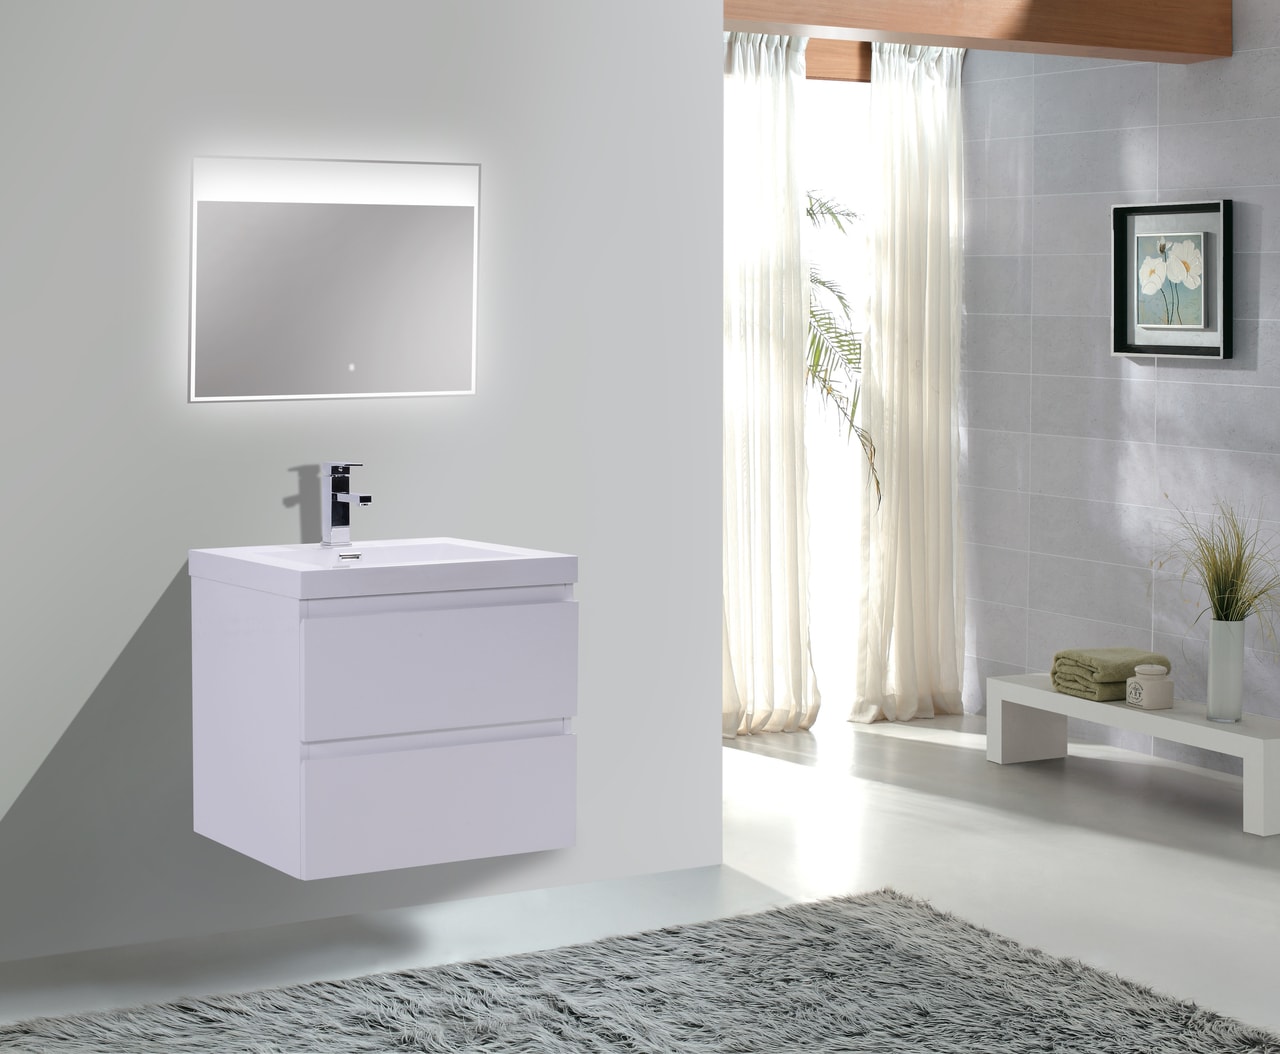 Bathroom Vanity 24 Inch And 12 Inch